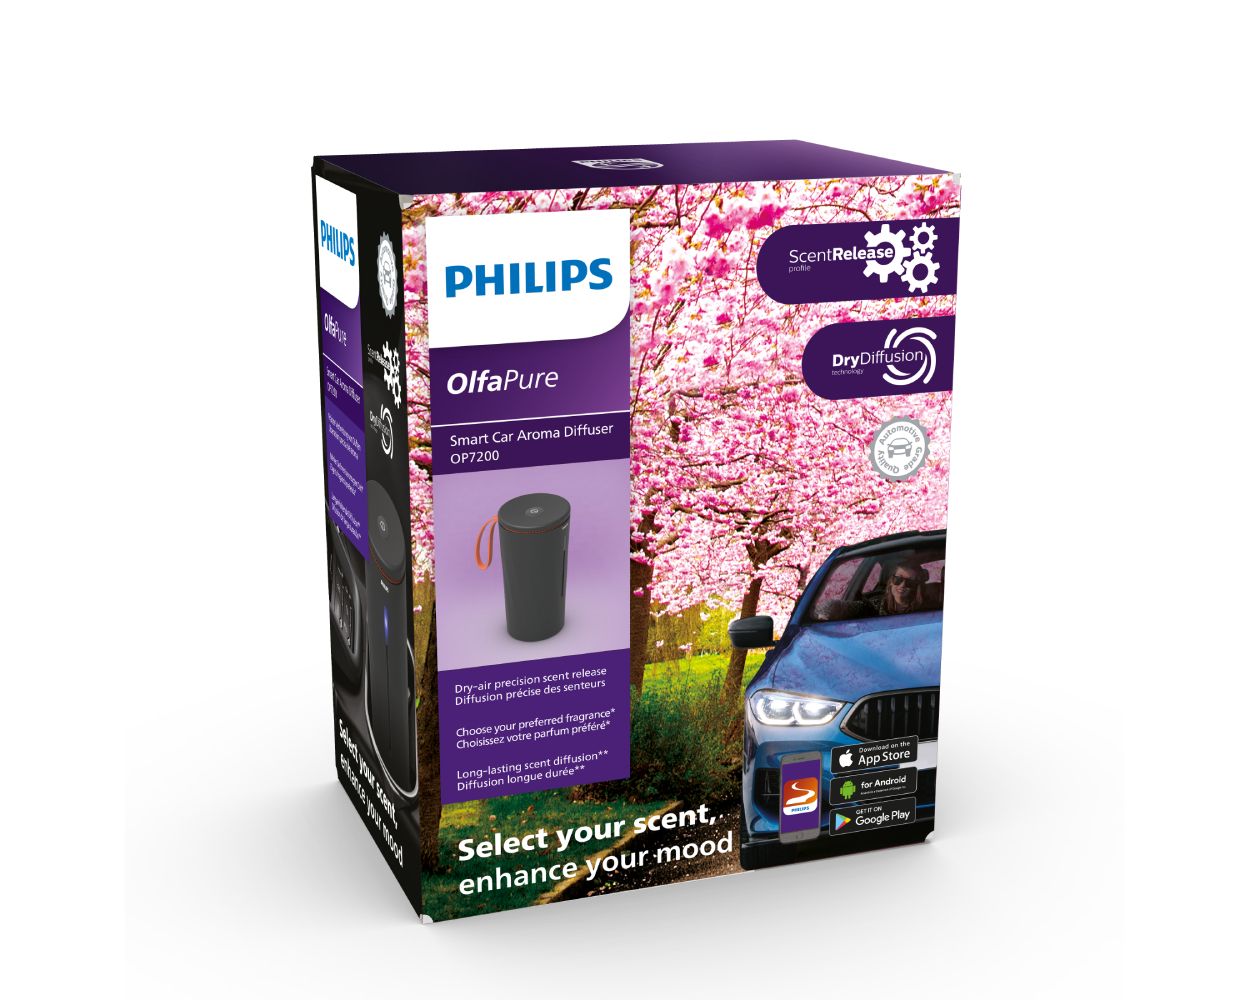 https://images.philips.com/is/image/philipsconsumer/aab0e54158a74aed81e4afe40086b82e?$jpglarge$&wid=1250